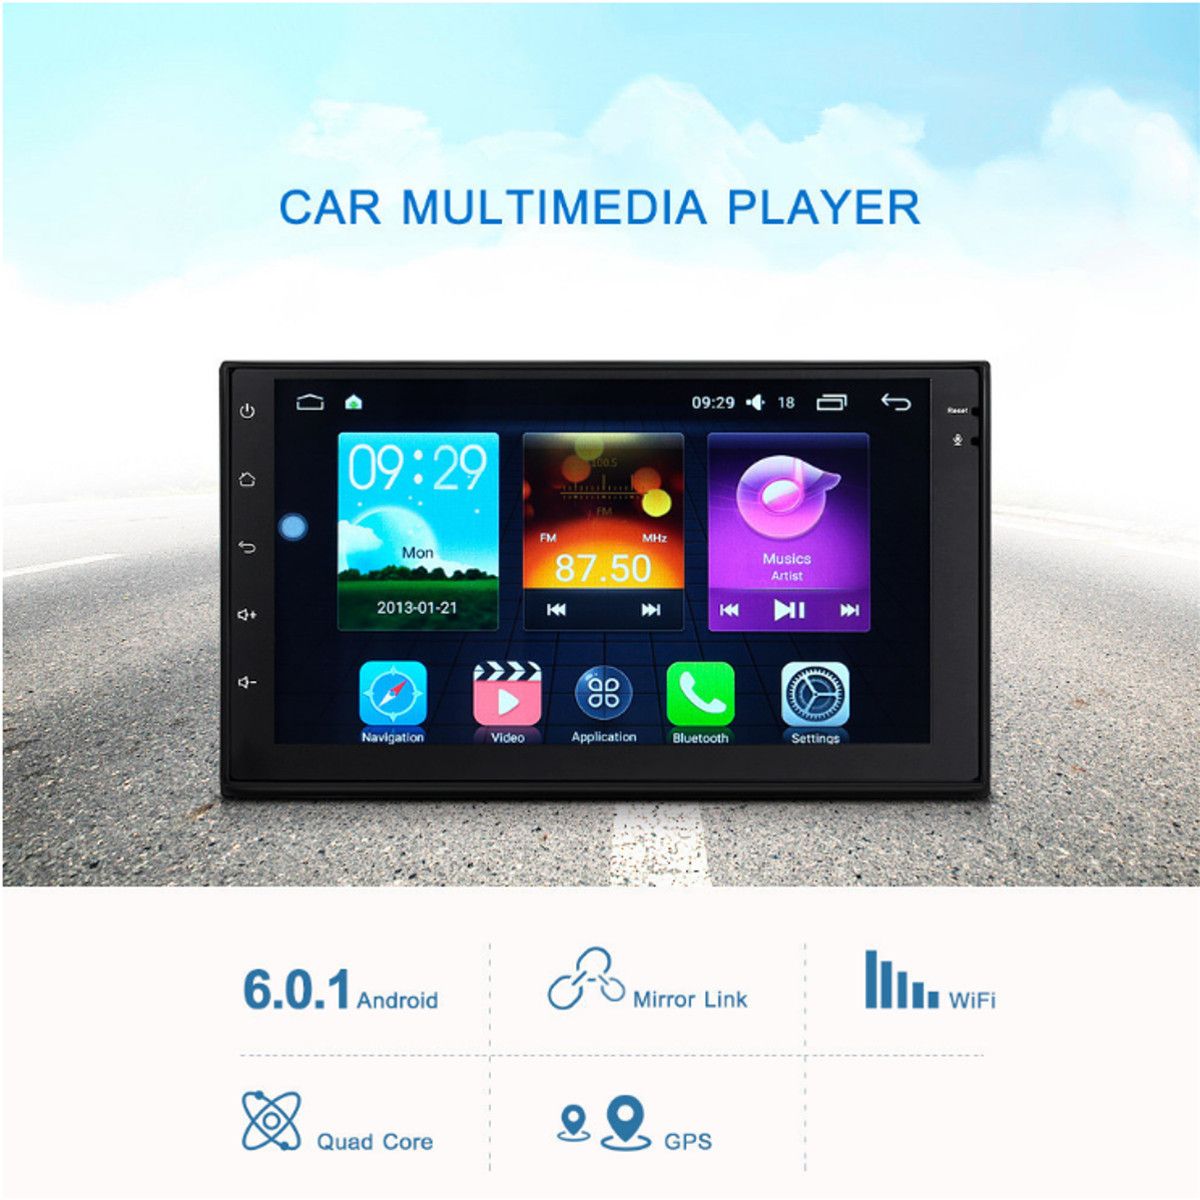 7033-7-Inch-2DIN-Android-60-Quad-Core-GPS-3G-WIFI-HD-Screen-Car-Radio-Stereo-MP5-DVD-Player-1261730